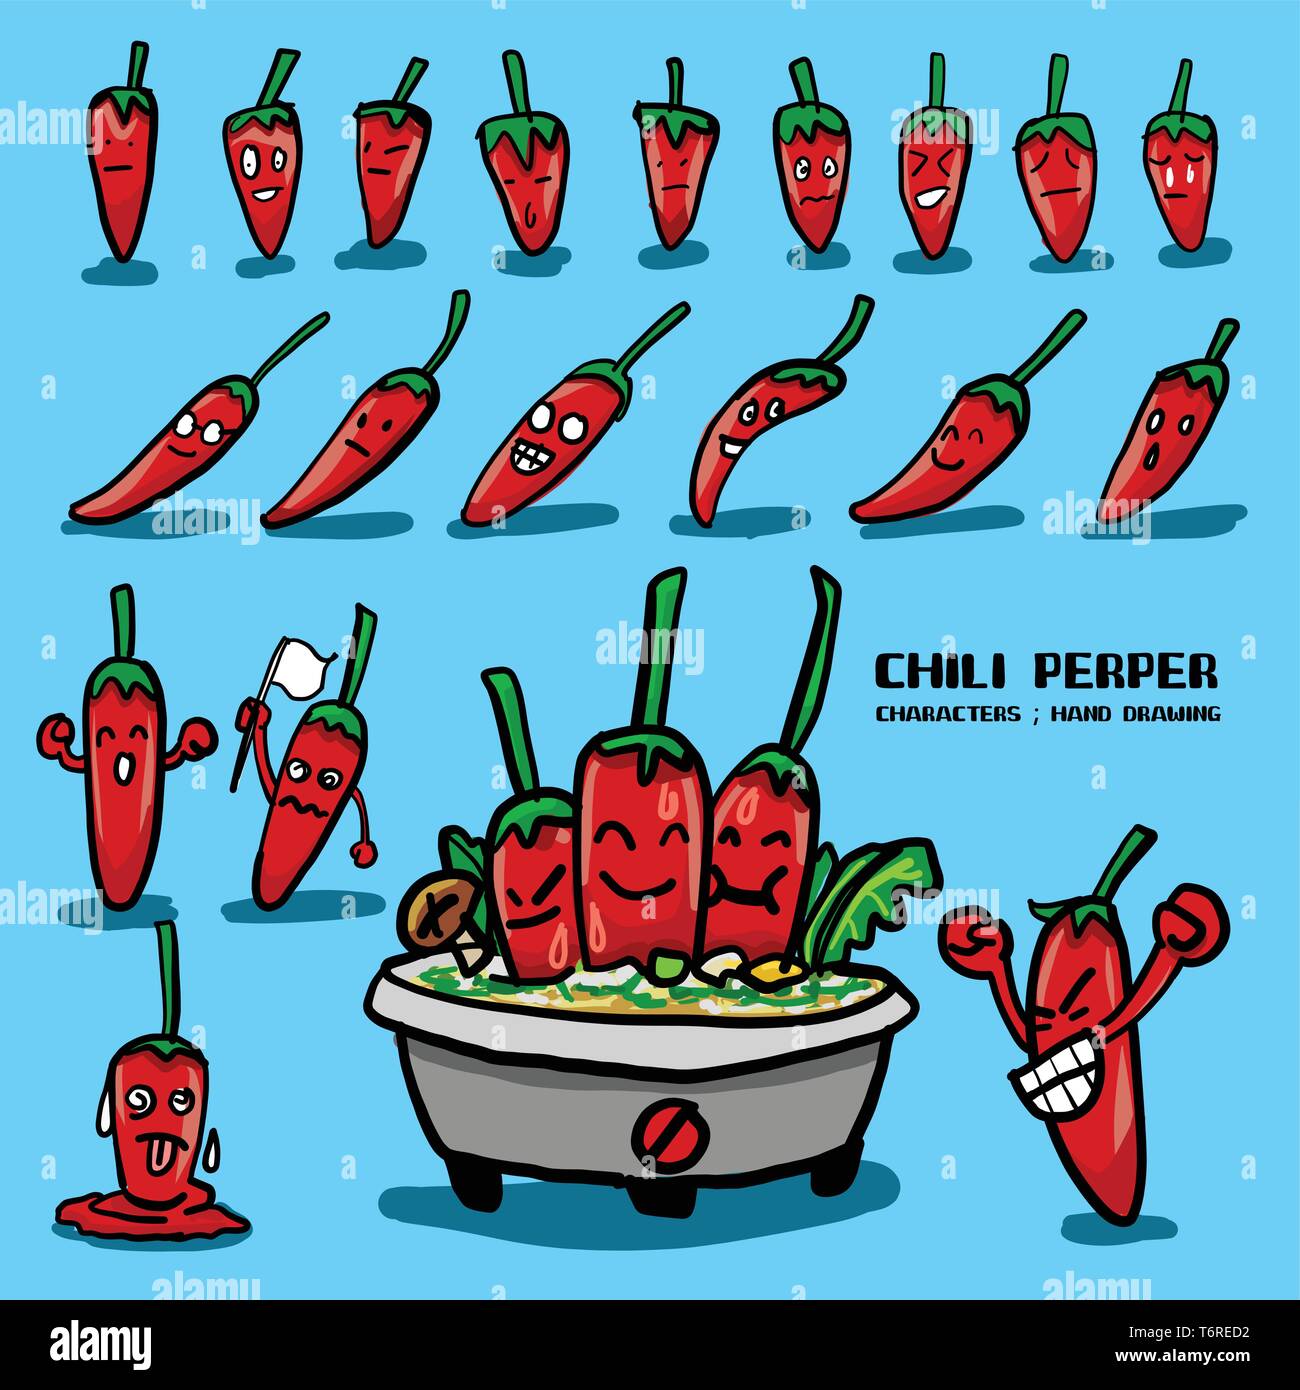 Chili pepper characters drawing by free hand and so many emotions in cartoon style Stock Vector